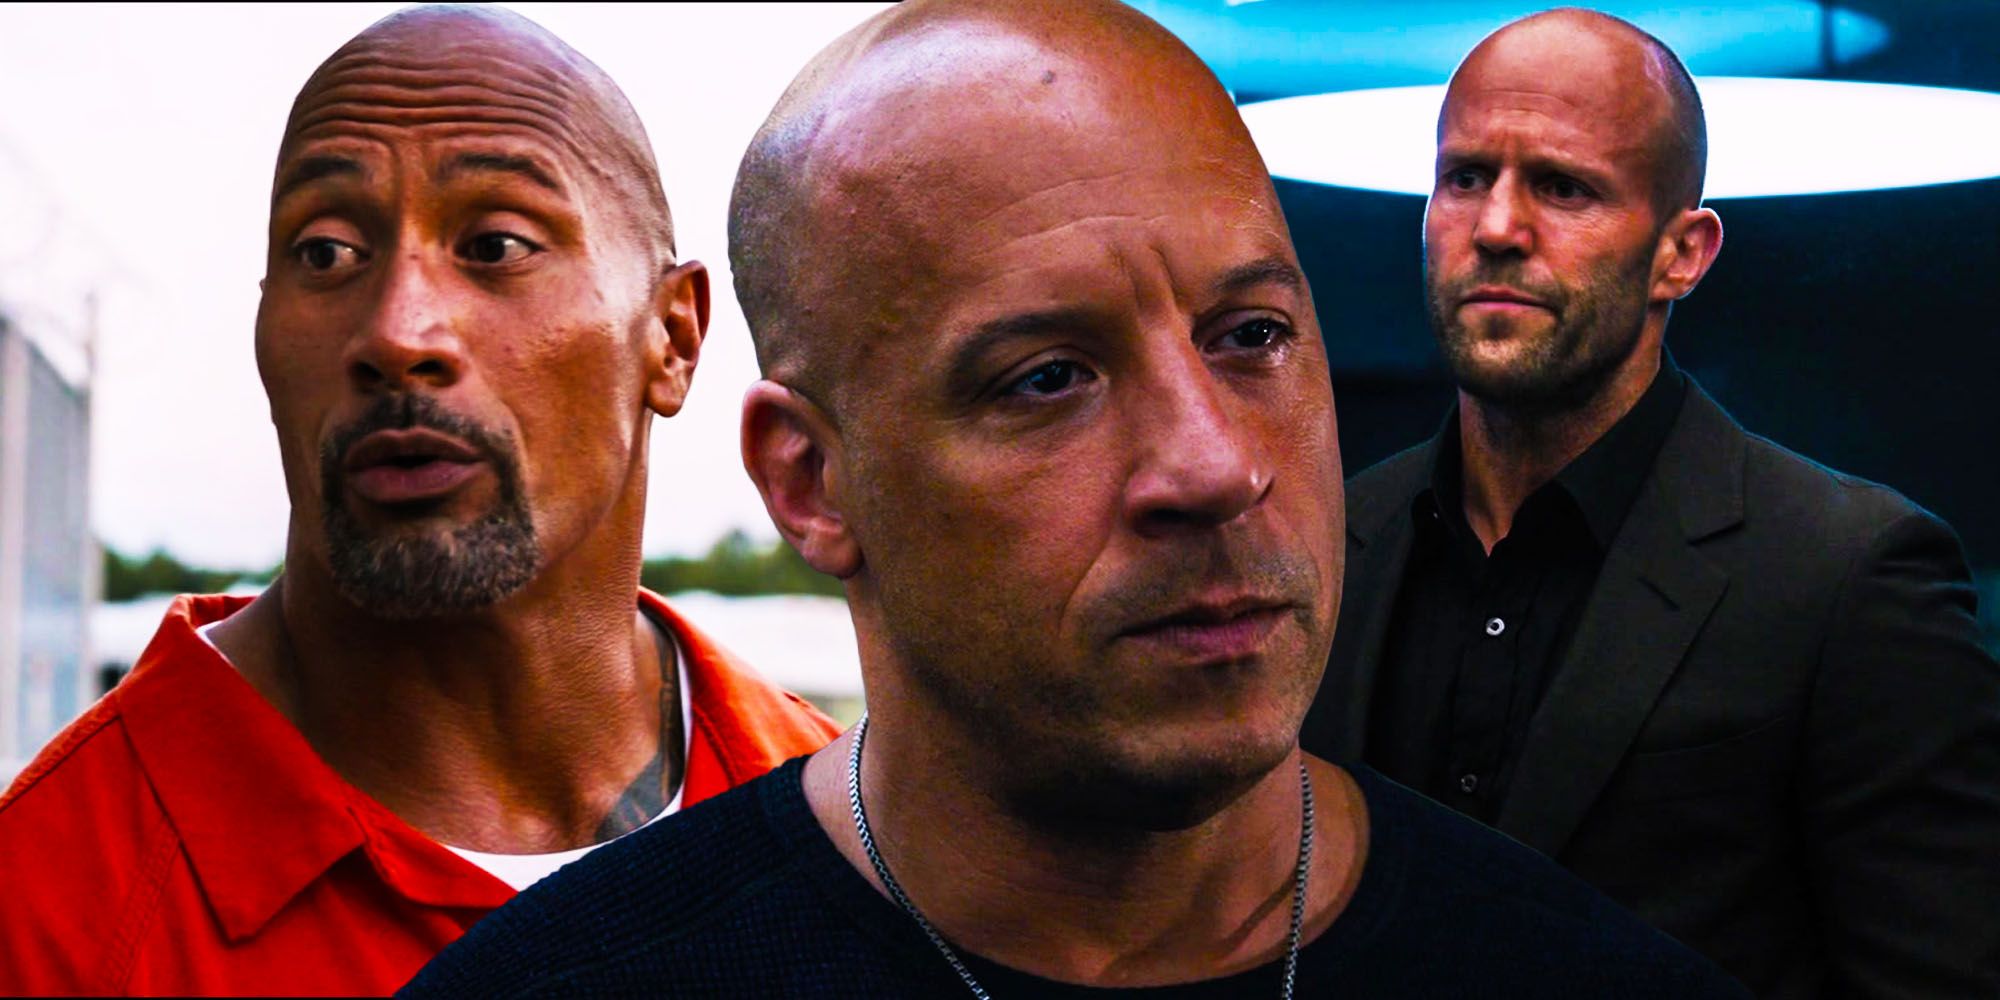 Fast and furious cast refusal to lose a fight becoming a problem vin diesel the rock jason statham